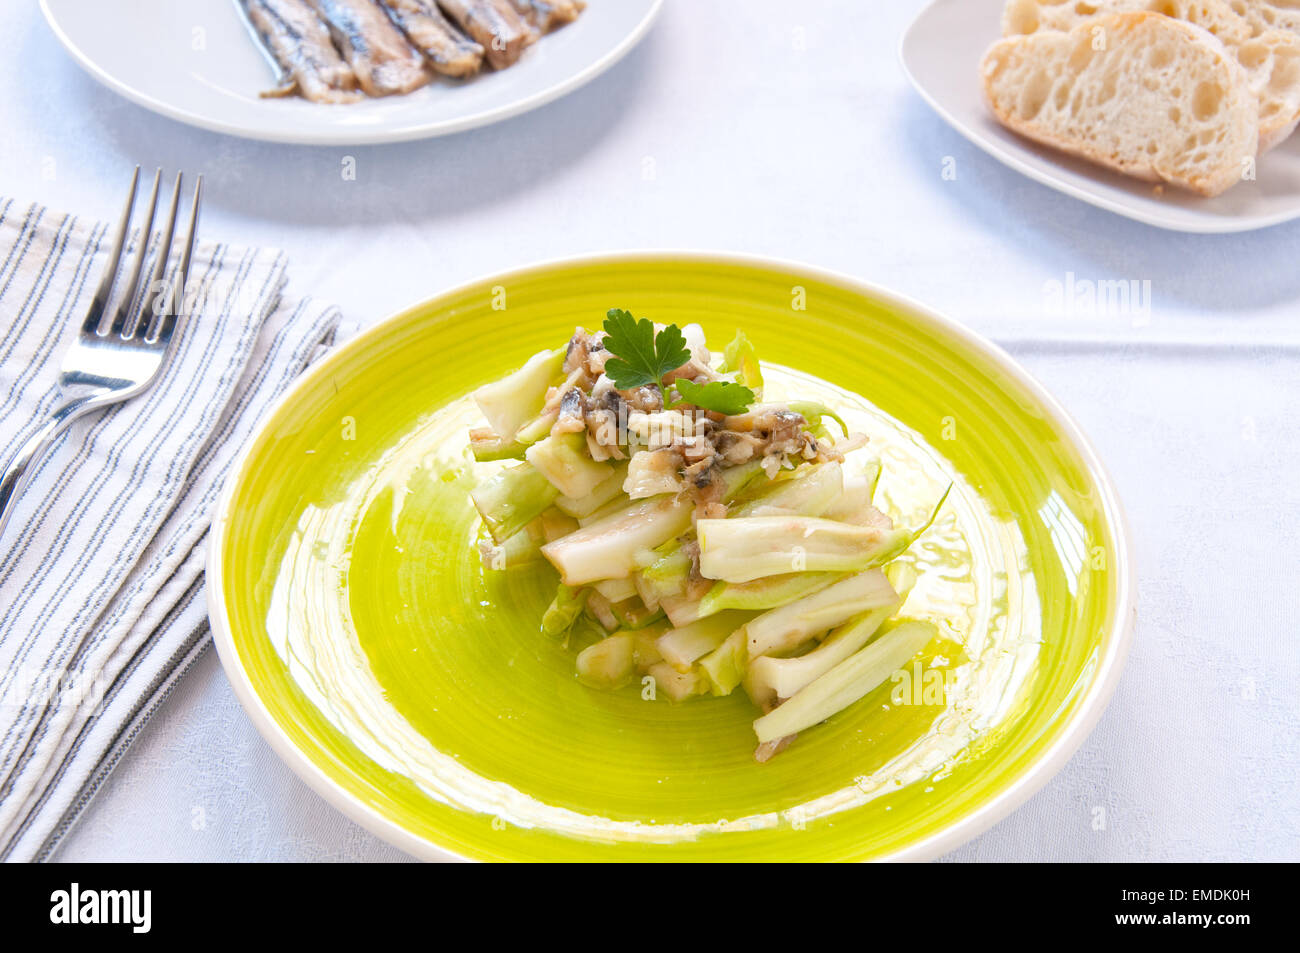 Chicory salad typical of the city of Rome Stock Photo